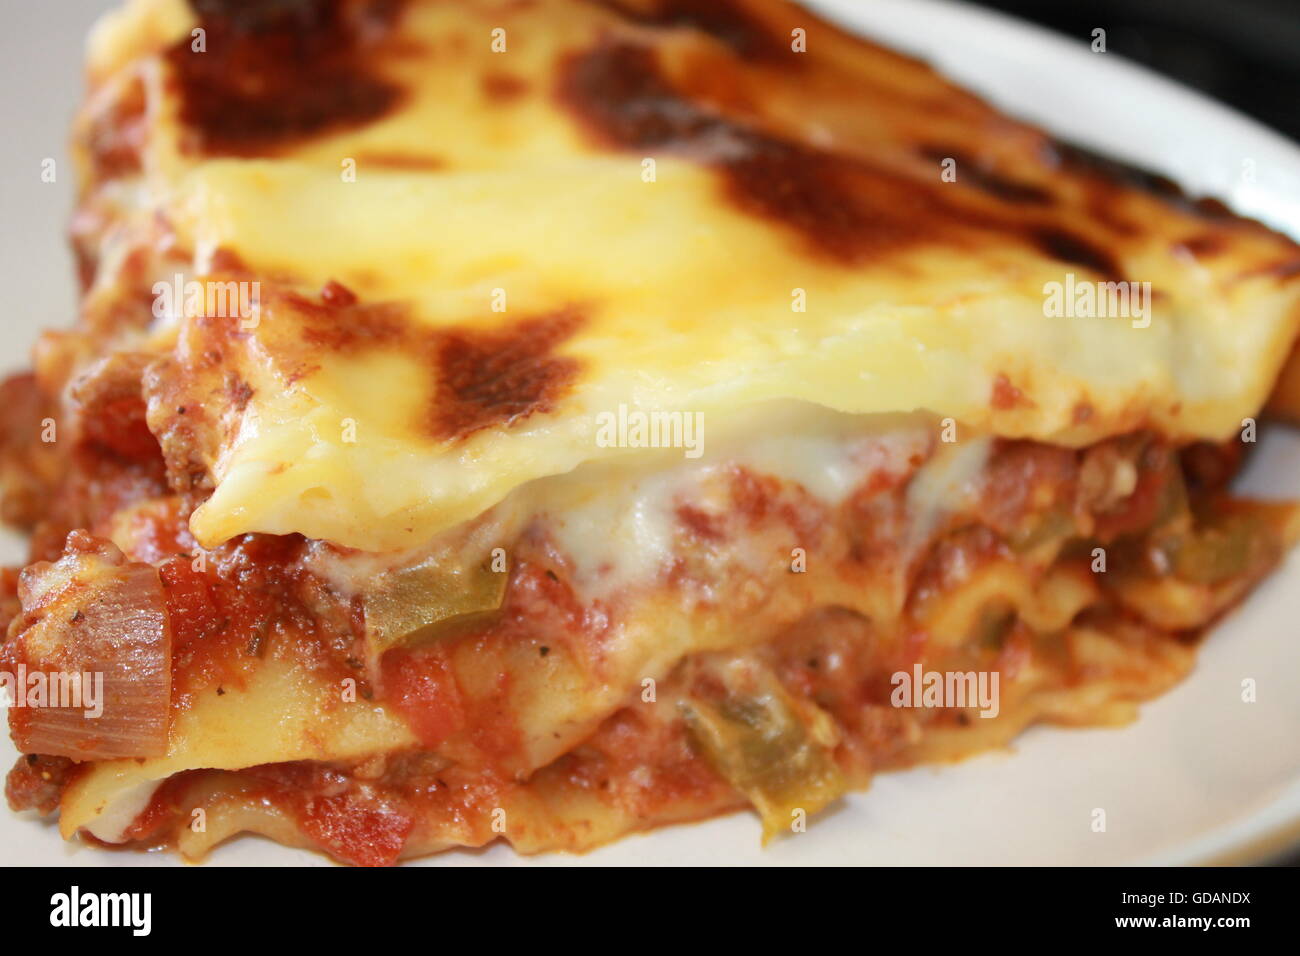 Homemade lasagne, home cooking, homemade cheese sauce, bolognese sauce, mince, onions, peppers, garlic, Italian food Stock Photo